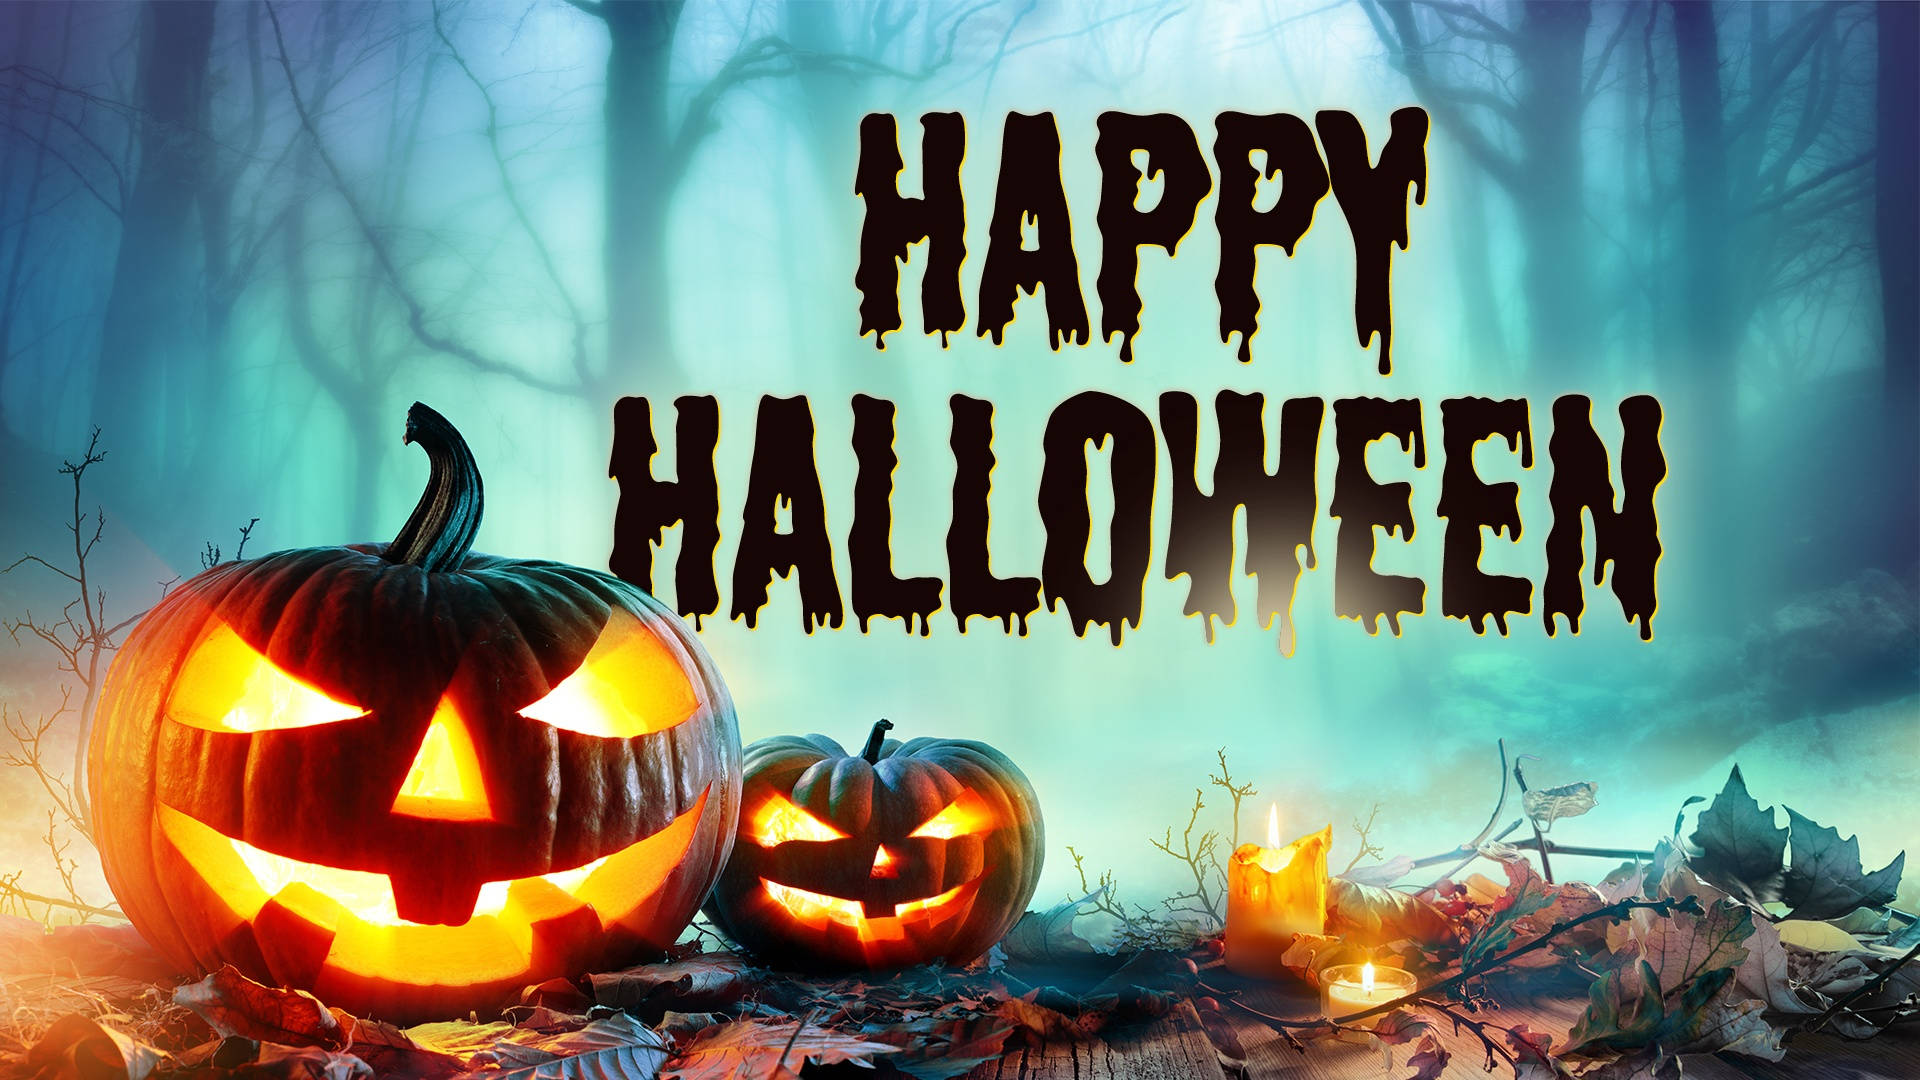 Celebrate Halloween With A Spooky Display. Background